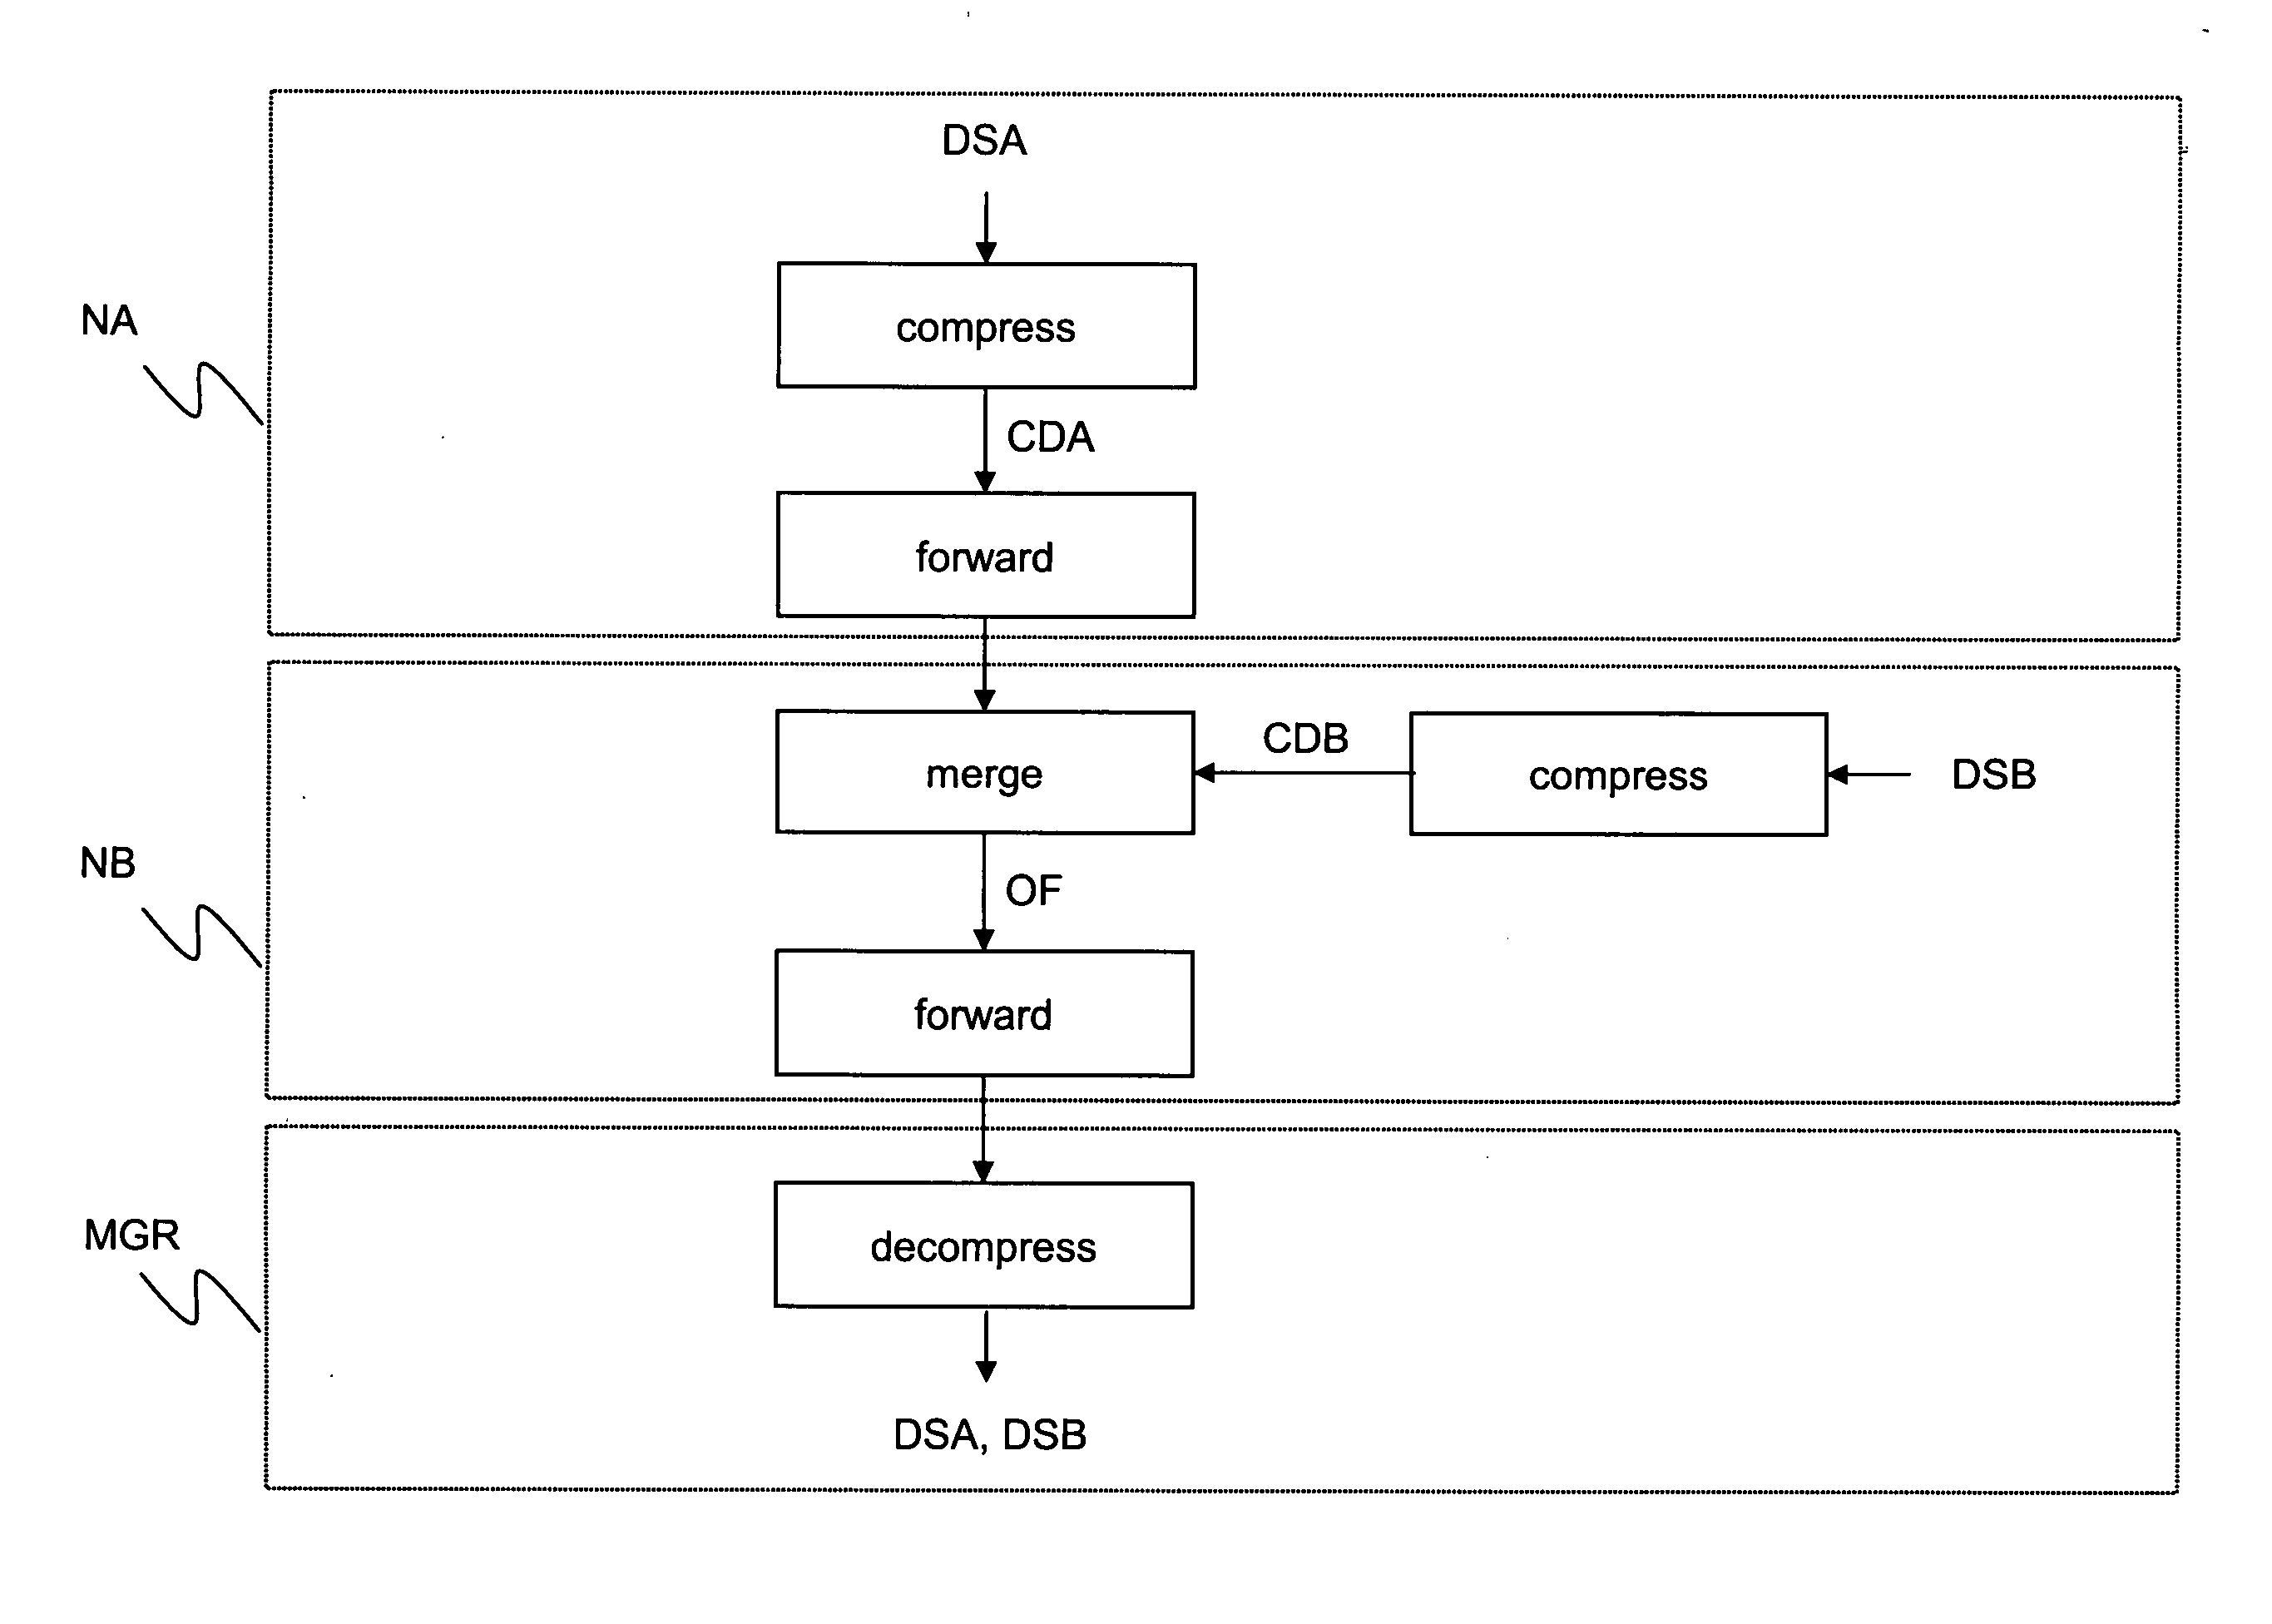 Data collection from network nodes in a telecommunication network